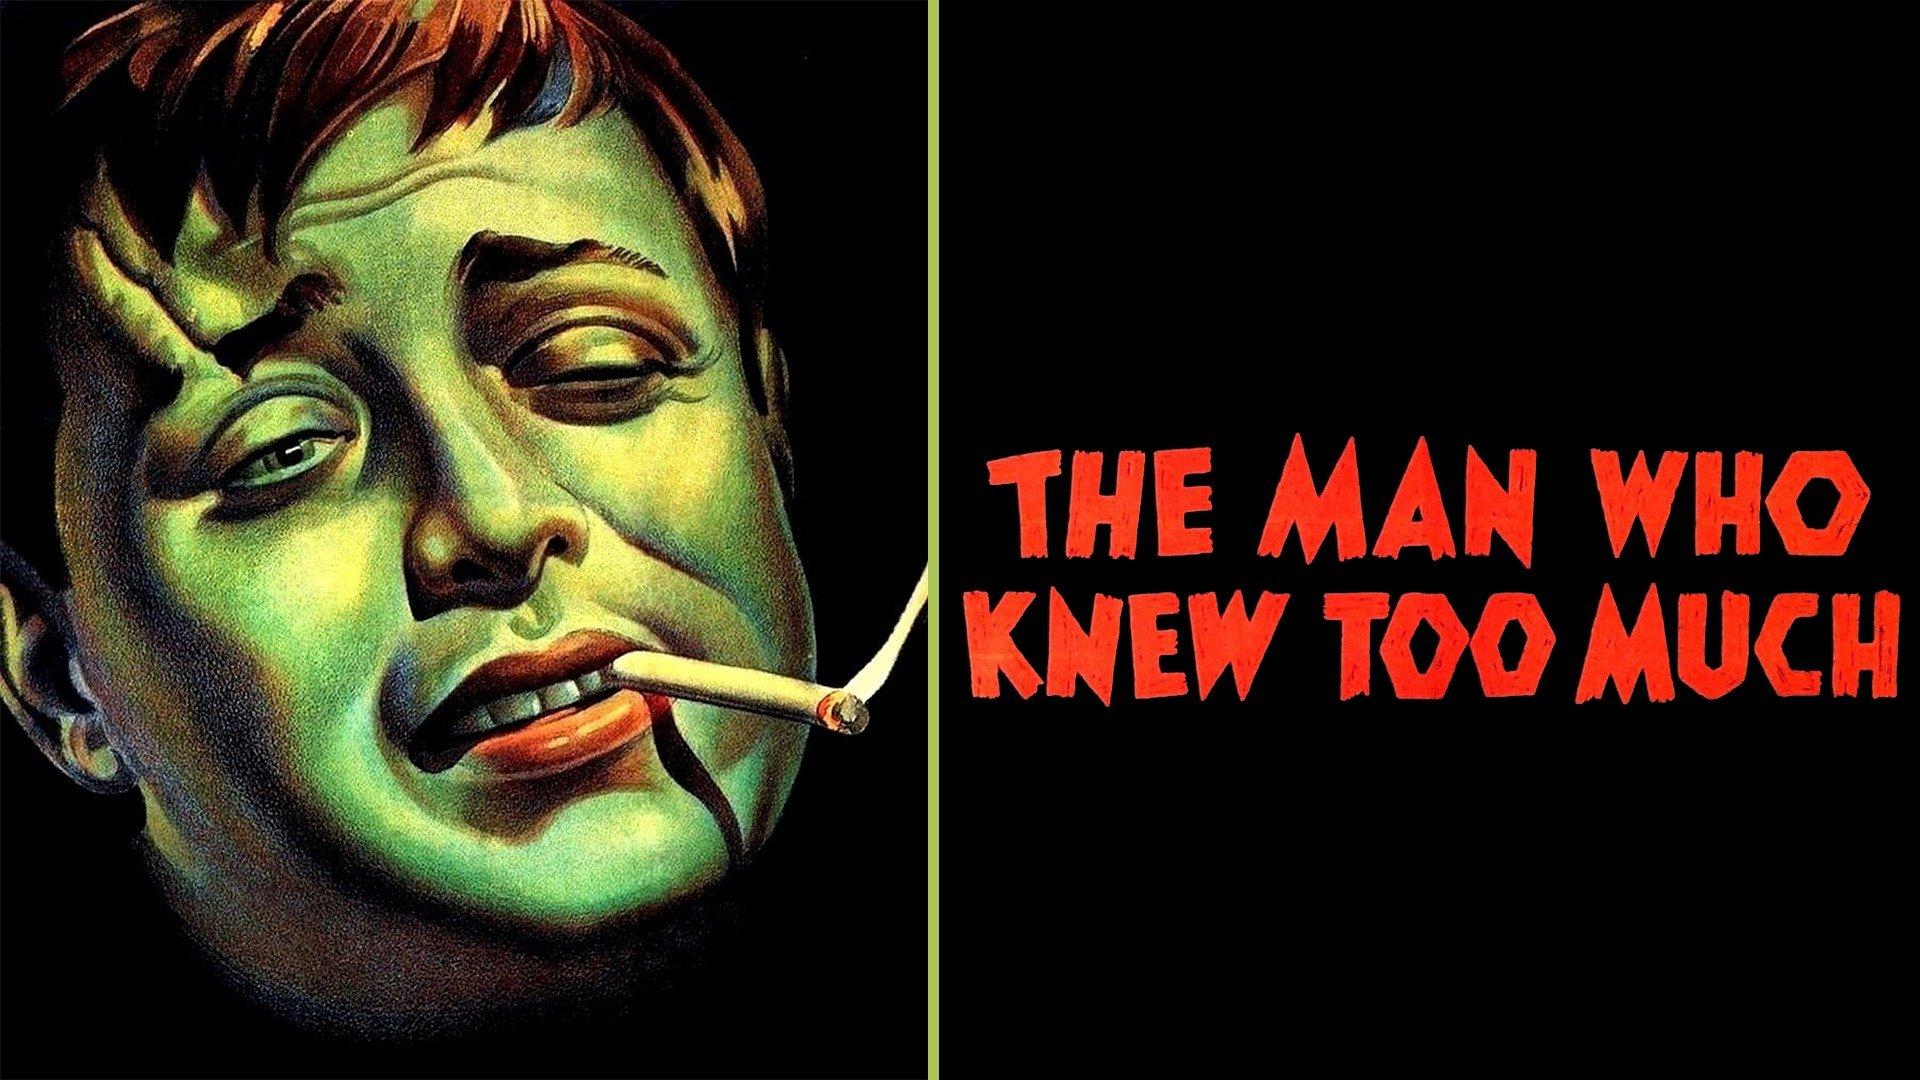 Watch The Man Who Knew Too Much Streaming Online on Philo (Free Trial)